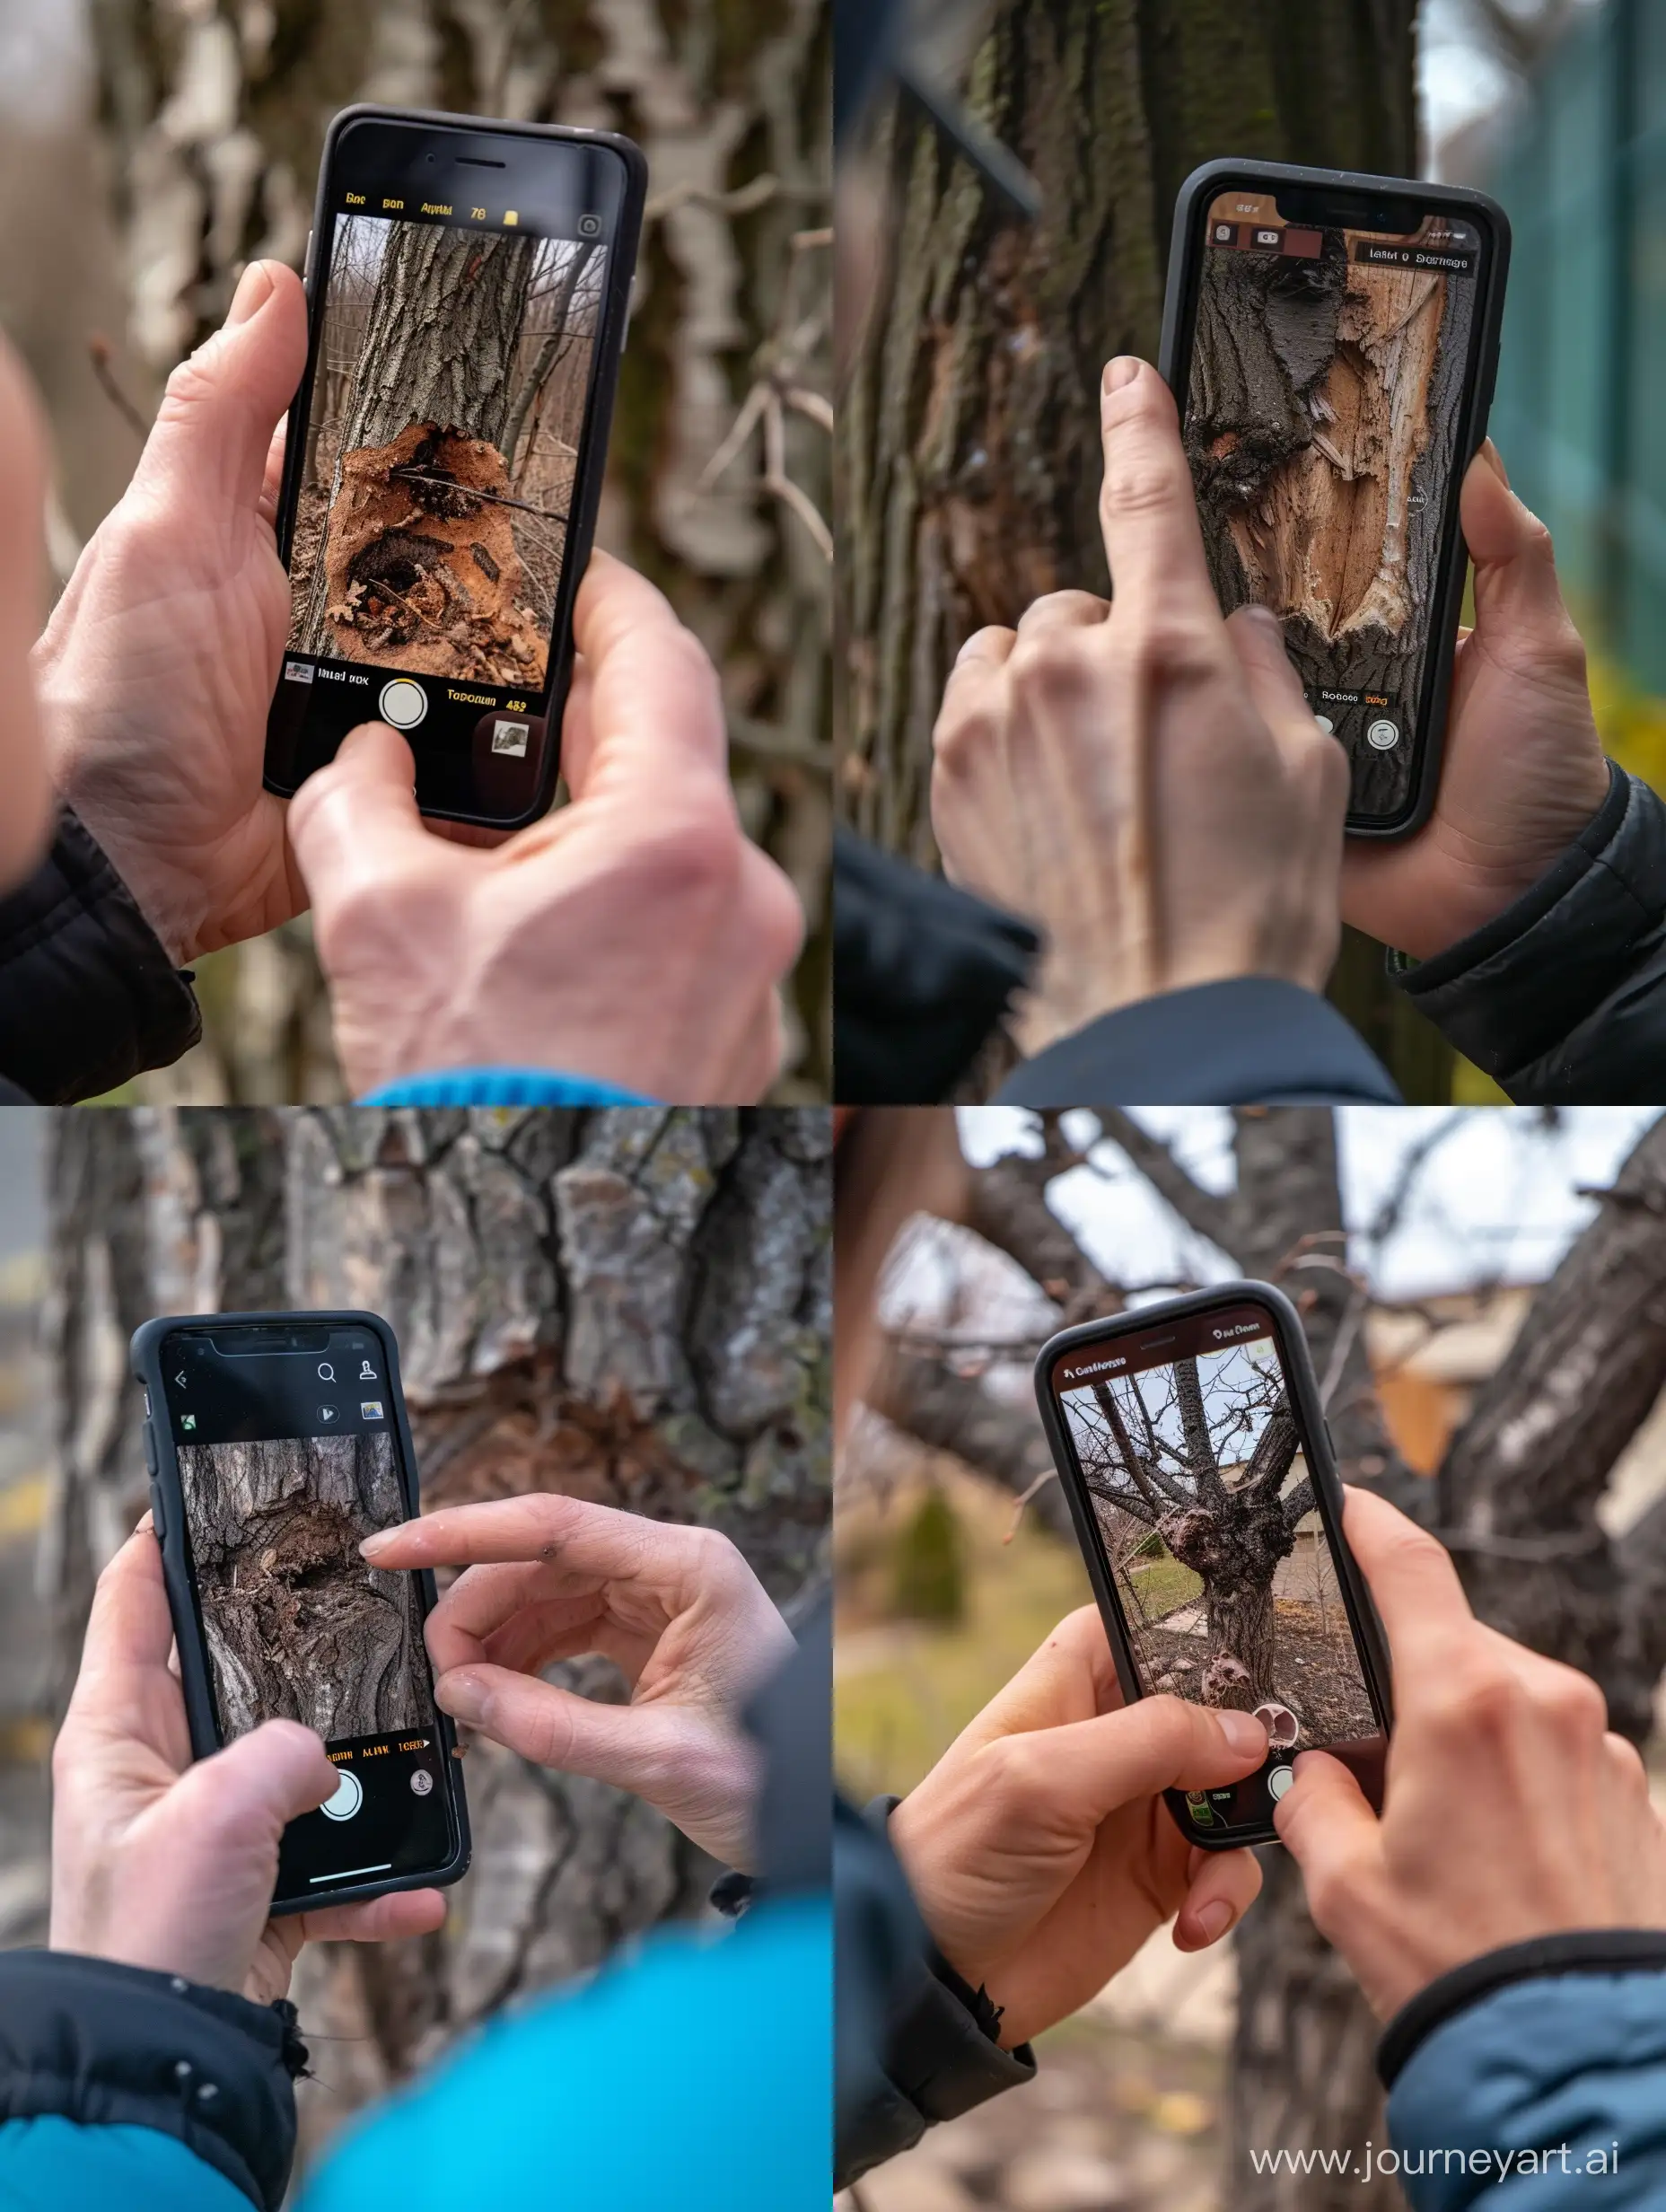 Capturing-Deterioration-Photographer-Documents-a-Distressed-Tree-on-their-Phone